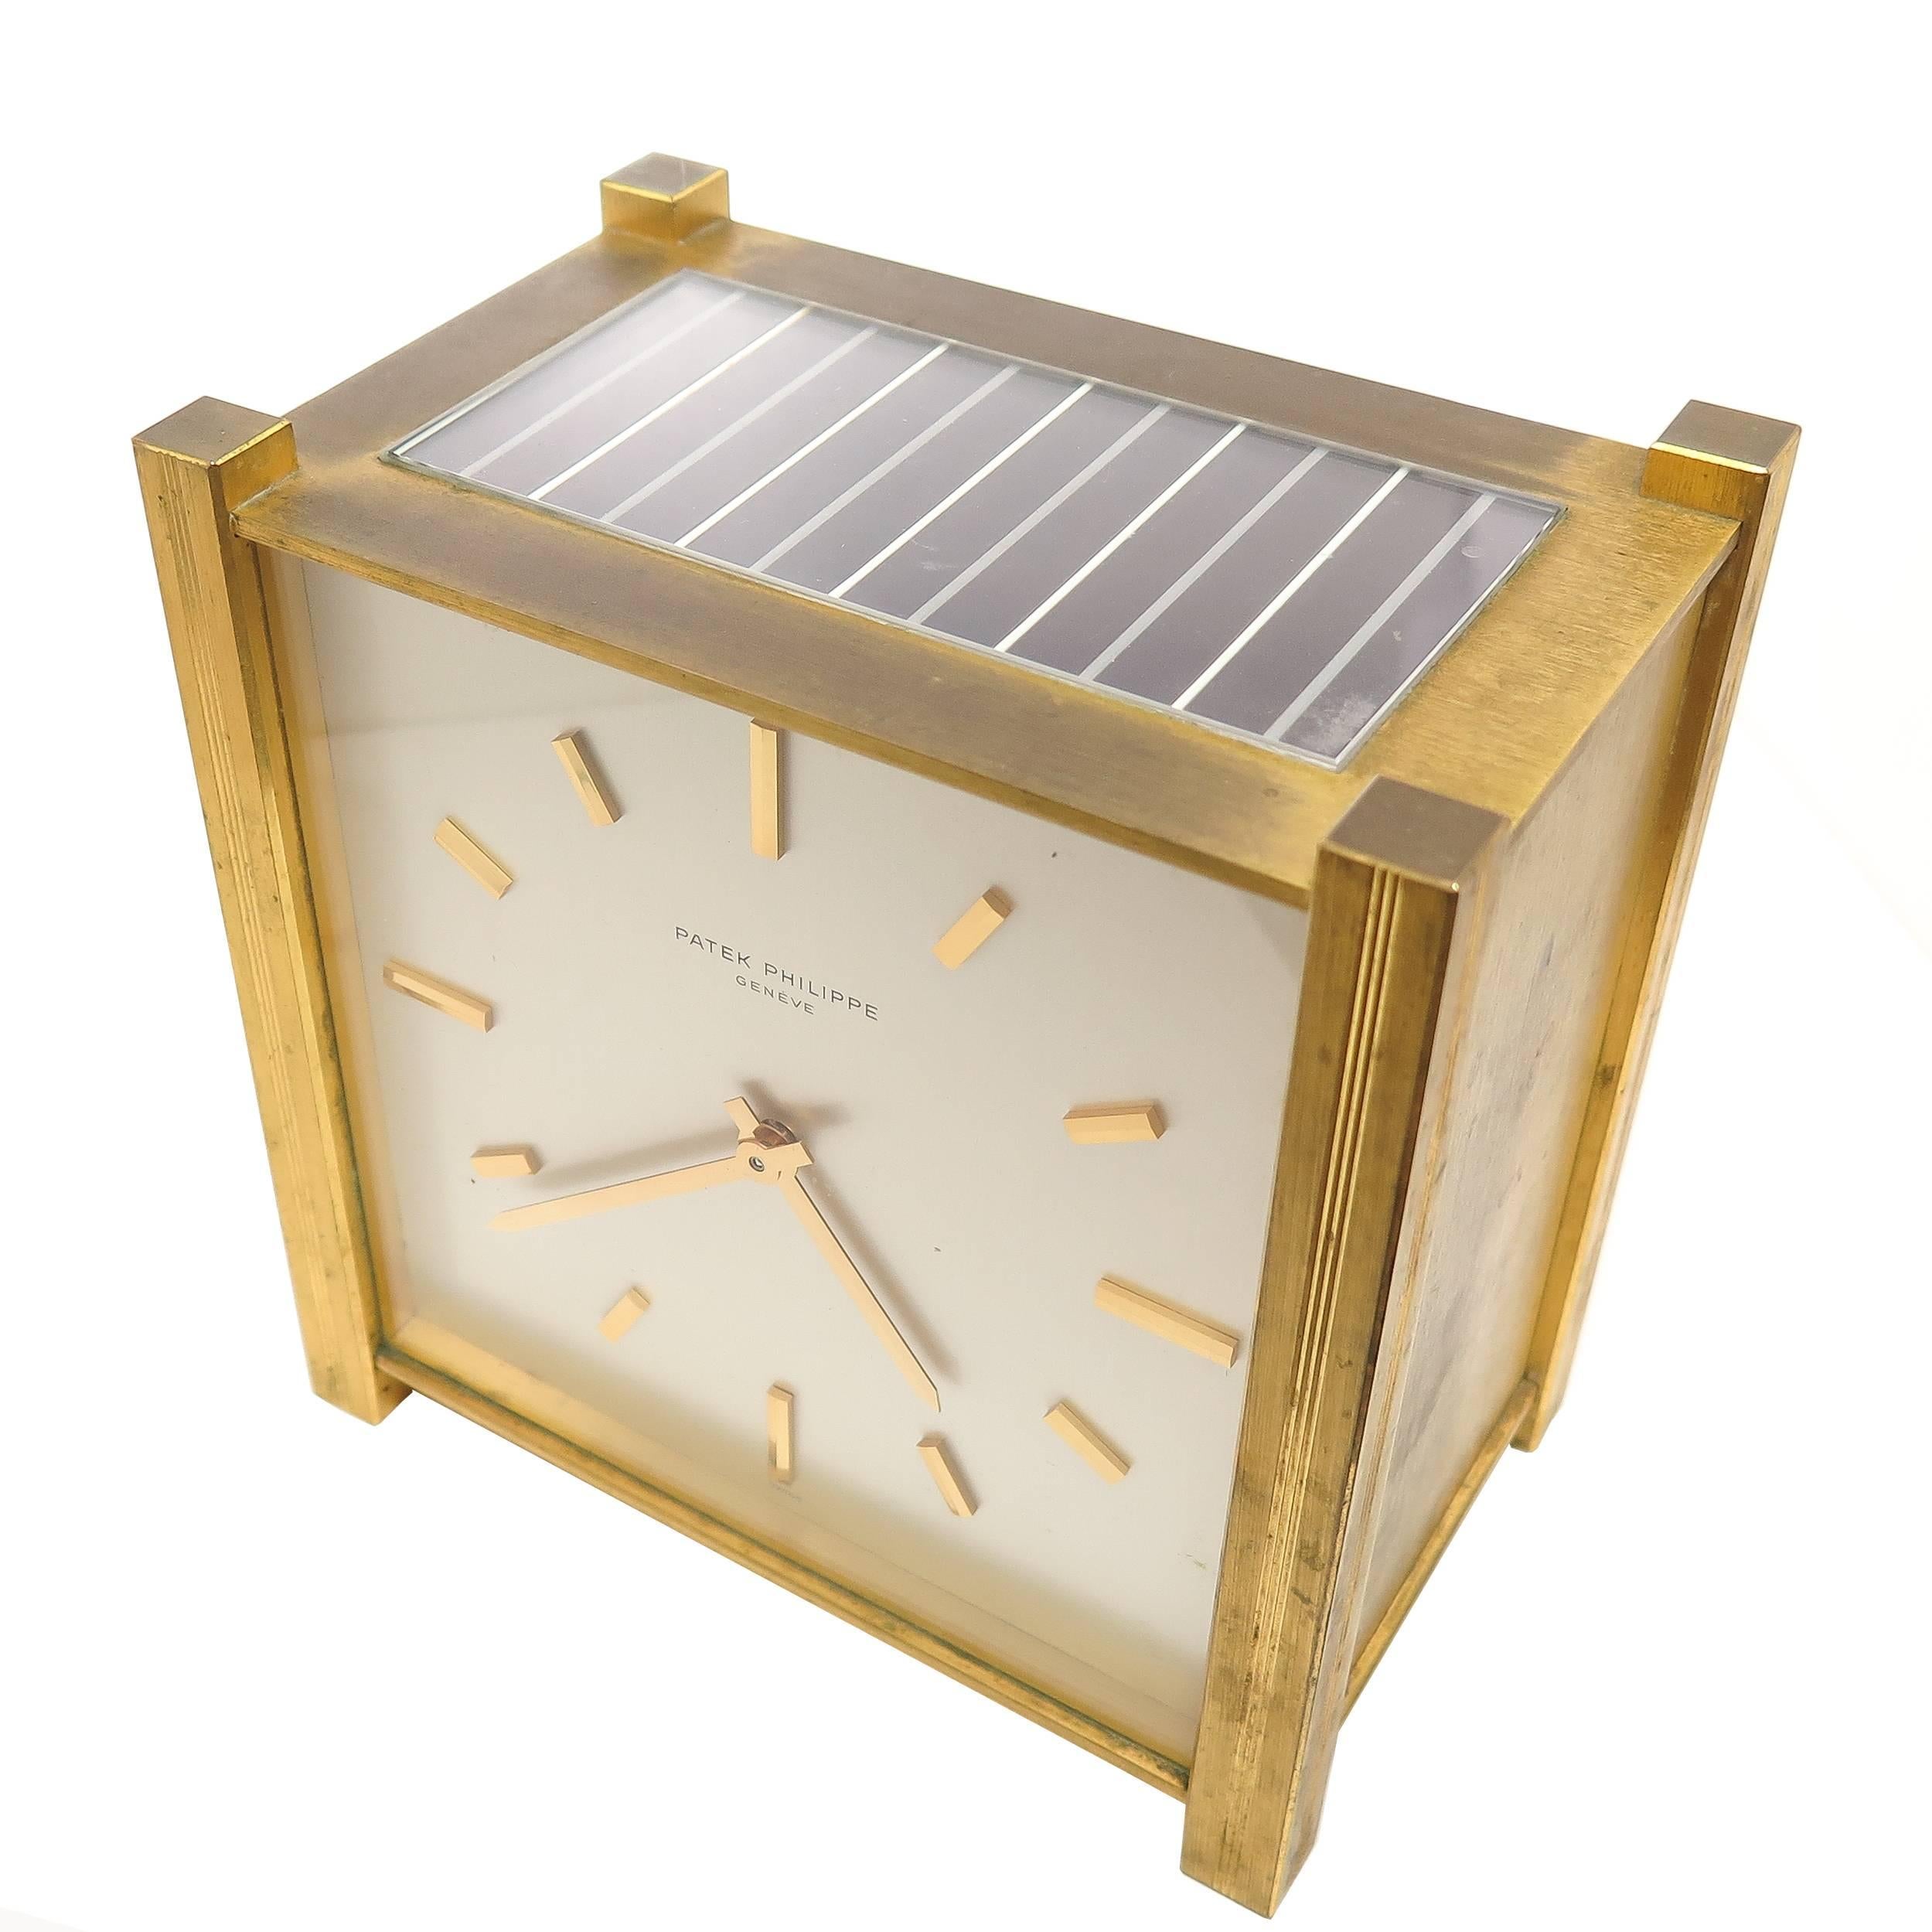 Circa 1970 Solar-powered electric table clock by Patek Philippe, Rectangular gilt brass brushed case measuring 5 5/8 X 5 5/8 X 3 1/2, with solar cells on the top, Excellent Mint Condition silvered Matt Dial with applied raised gilt indexes and